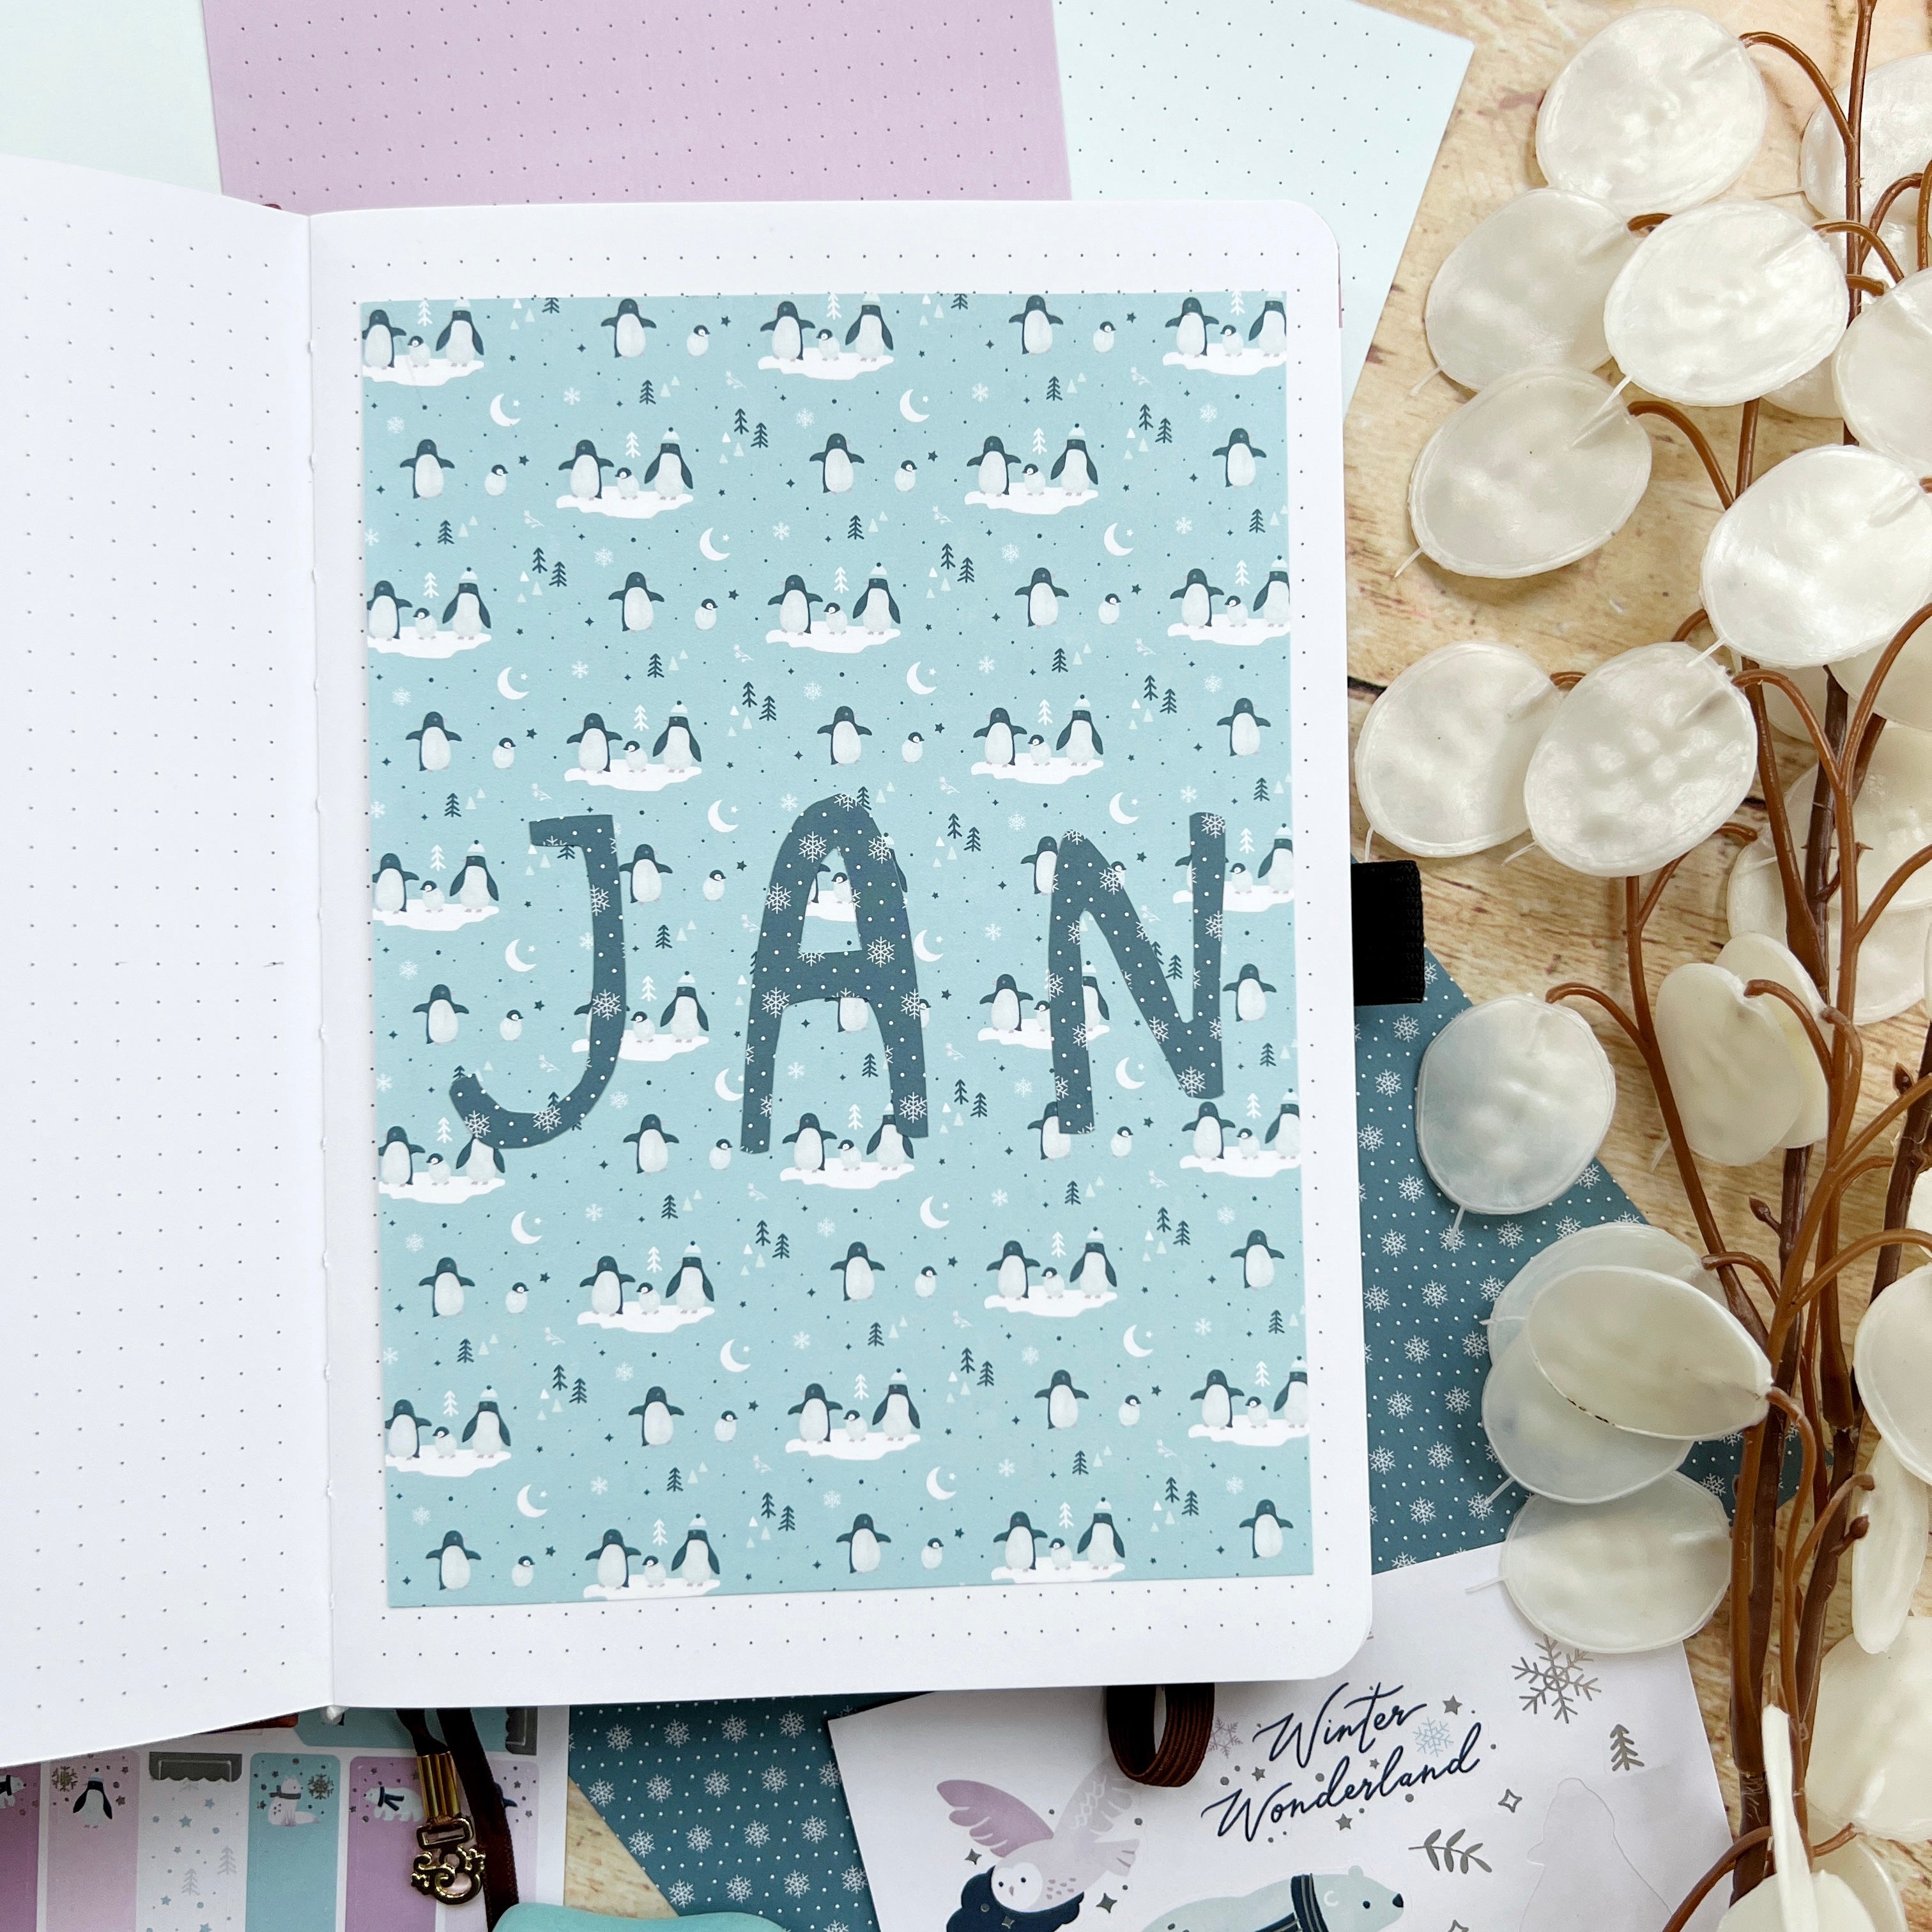 Open journal with letters cut from patterned paper